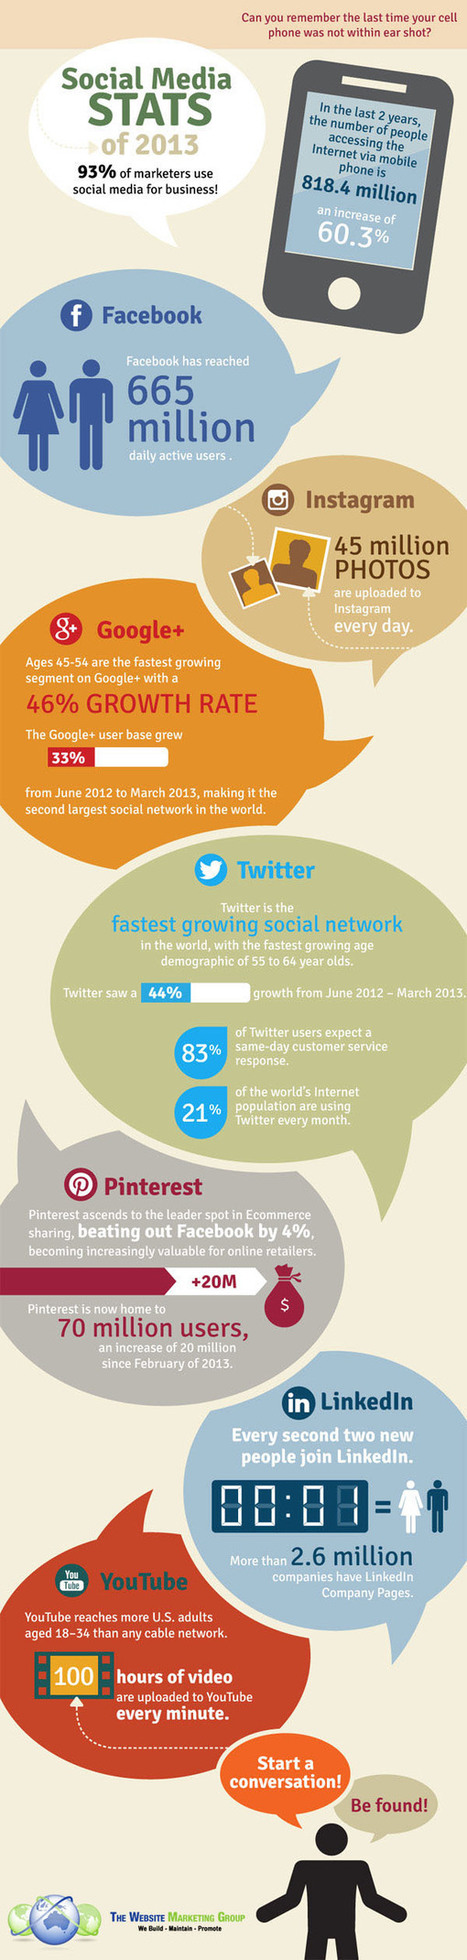 Social Media Infographic 2013 : Which platform is growing the fastest? | Internet of Things - Technology focus | Scoop.it